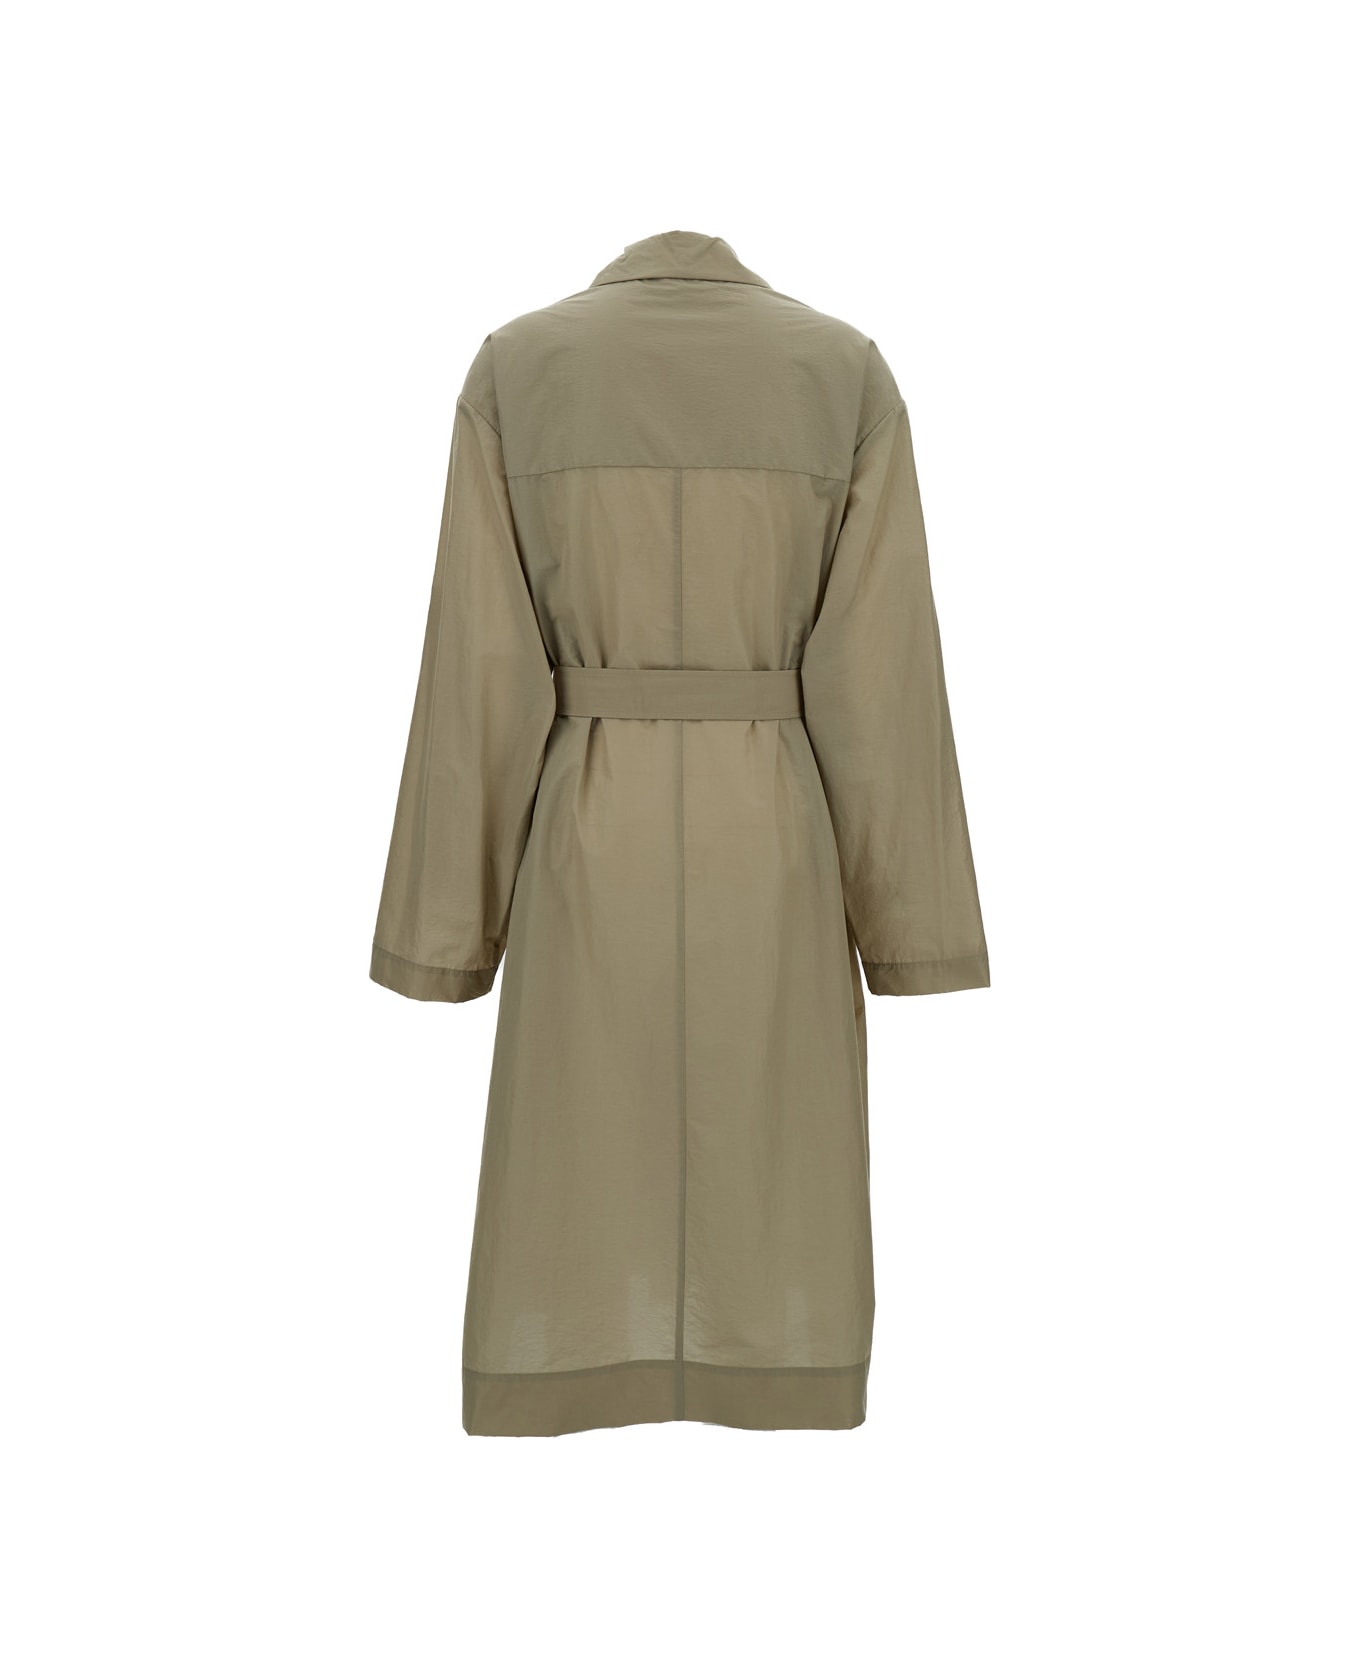 Philosophy di Lorenzo Serafini Olive Green Trench Coat With Buttons In Technical Fabric Woman - Green